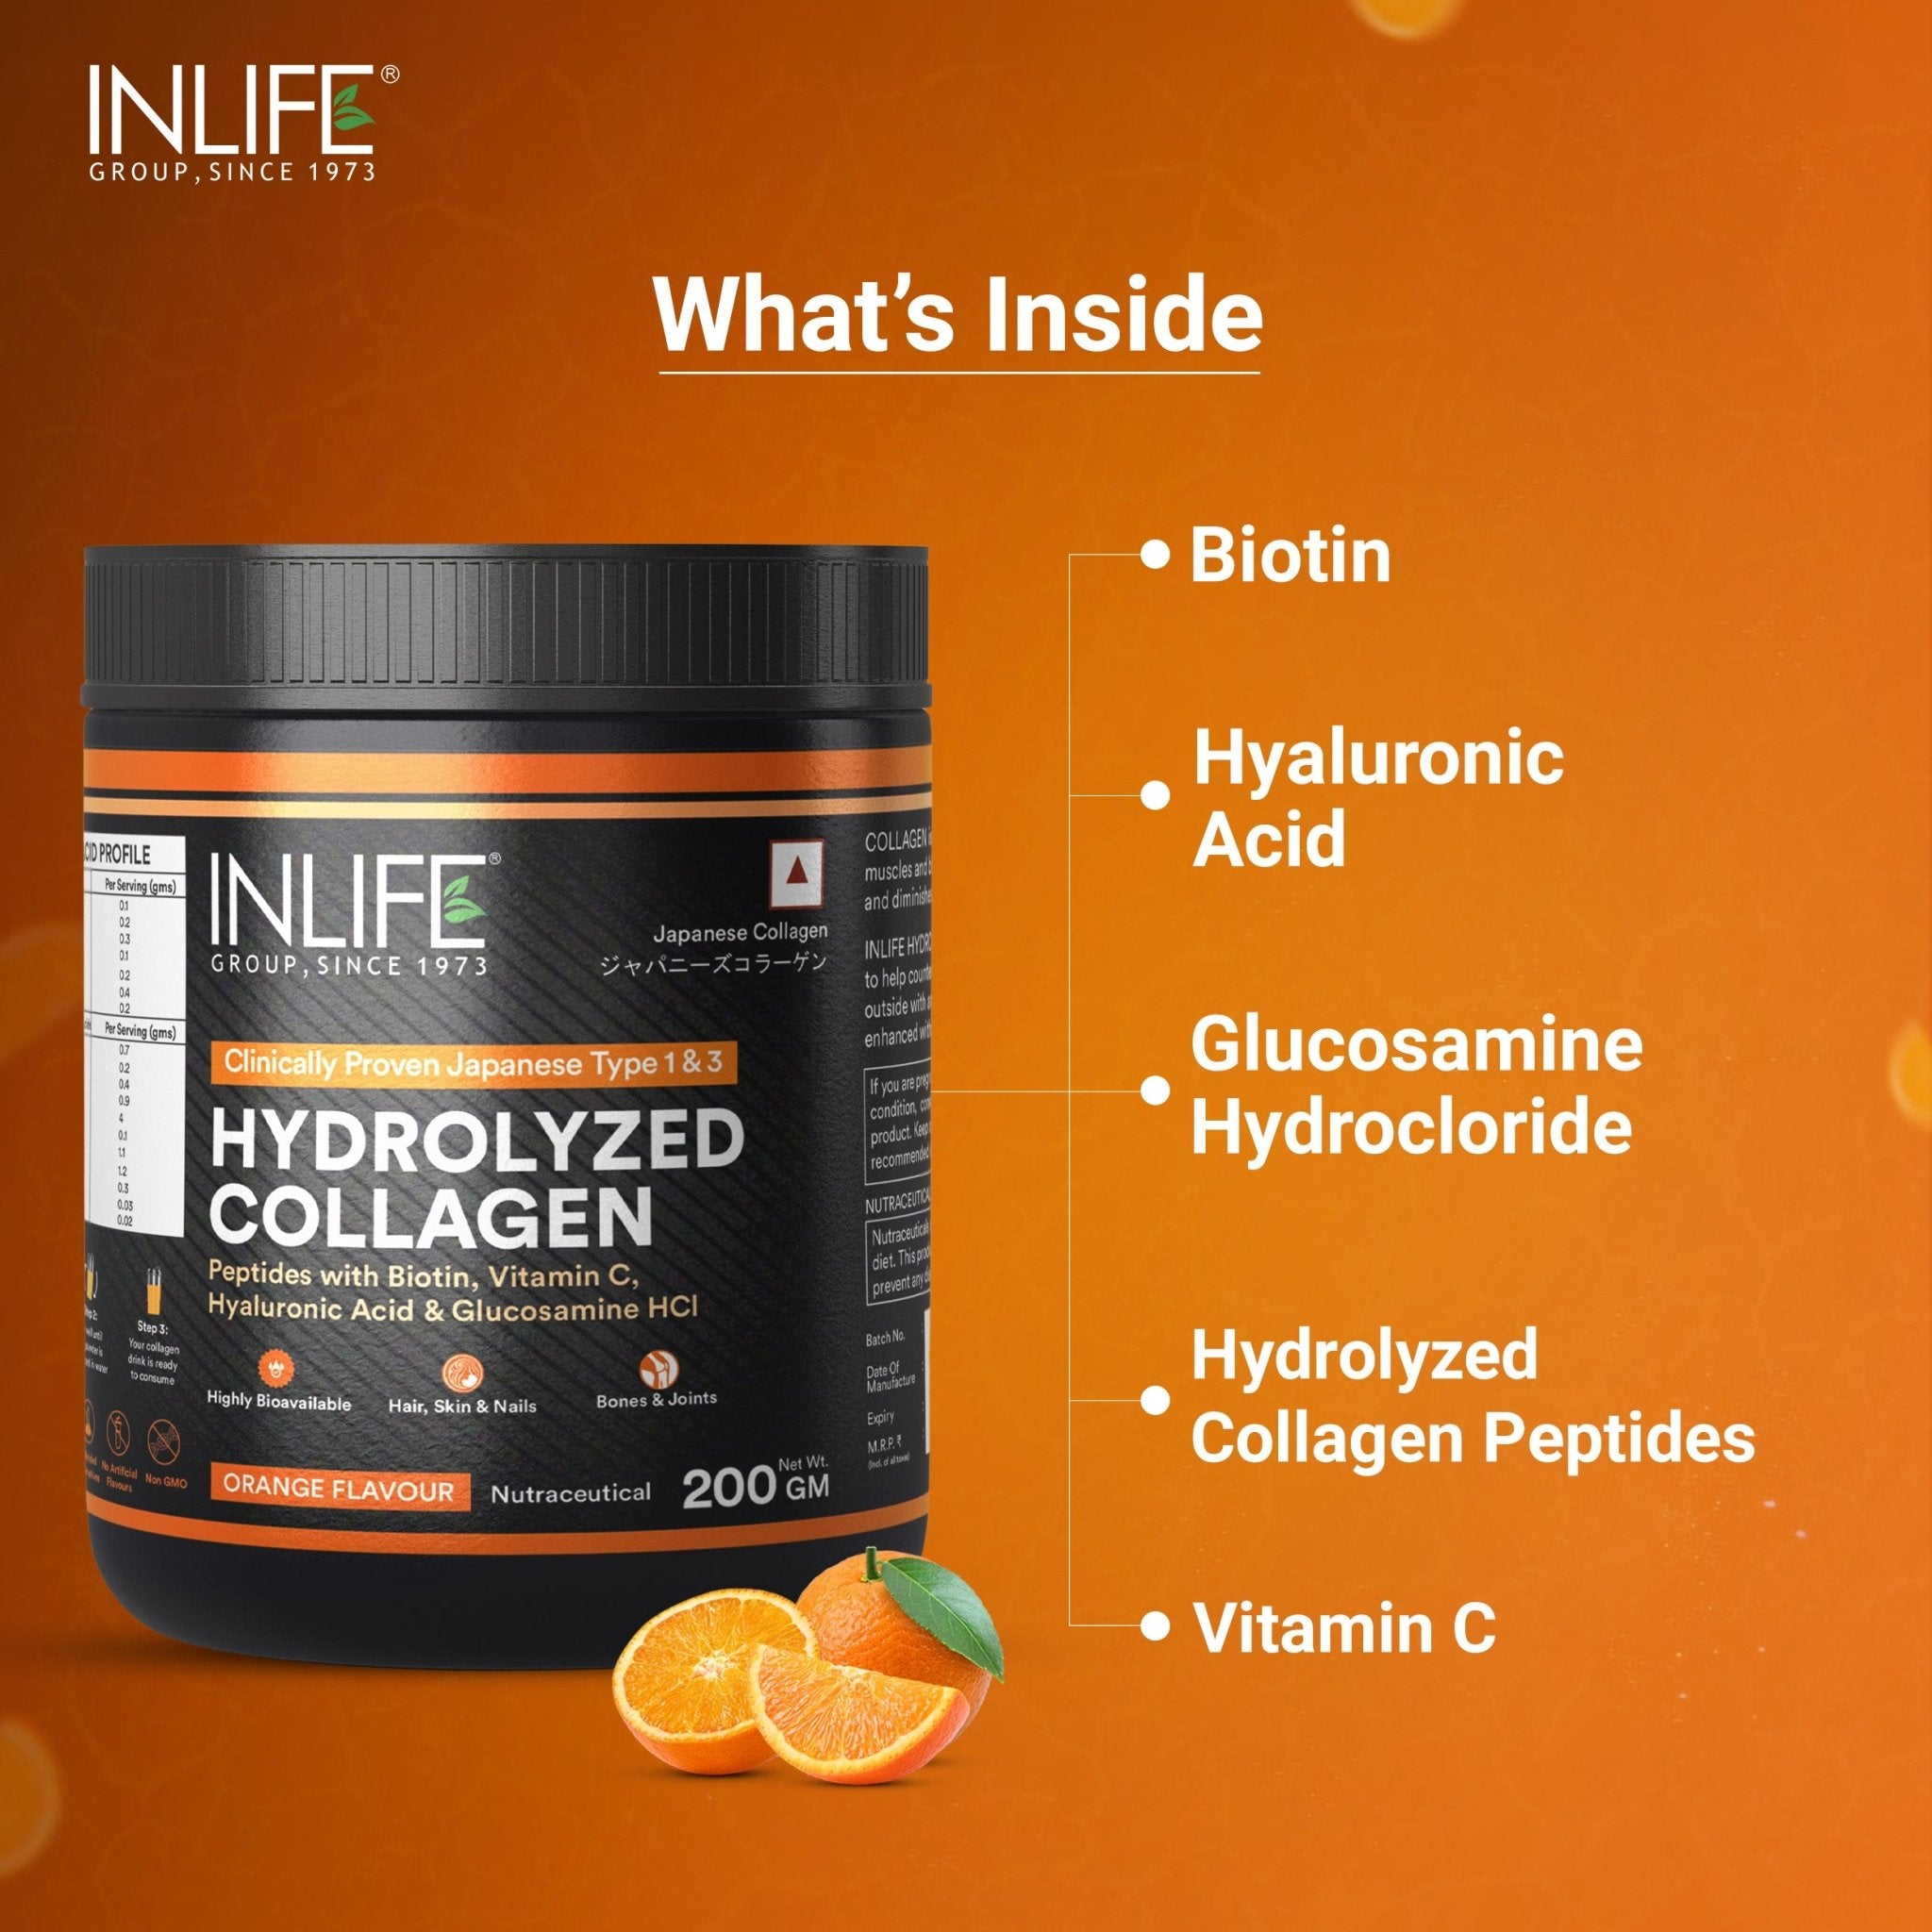 INLIFE Japanese Collagen Peptides with Biotin, Hyaluronic Acid & Glucosamine HCl, 200g - Inlife Pharma Private Limited